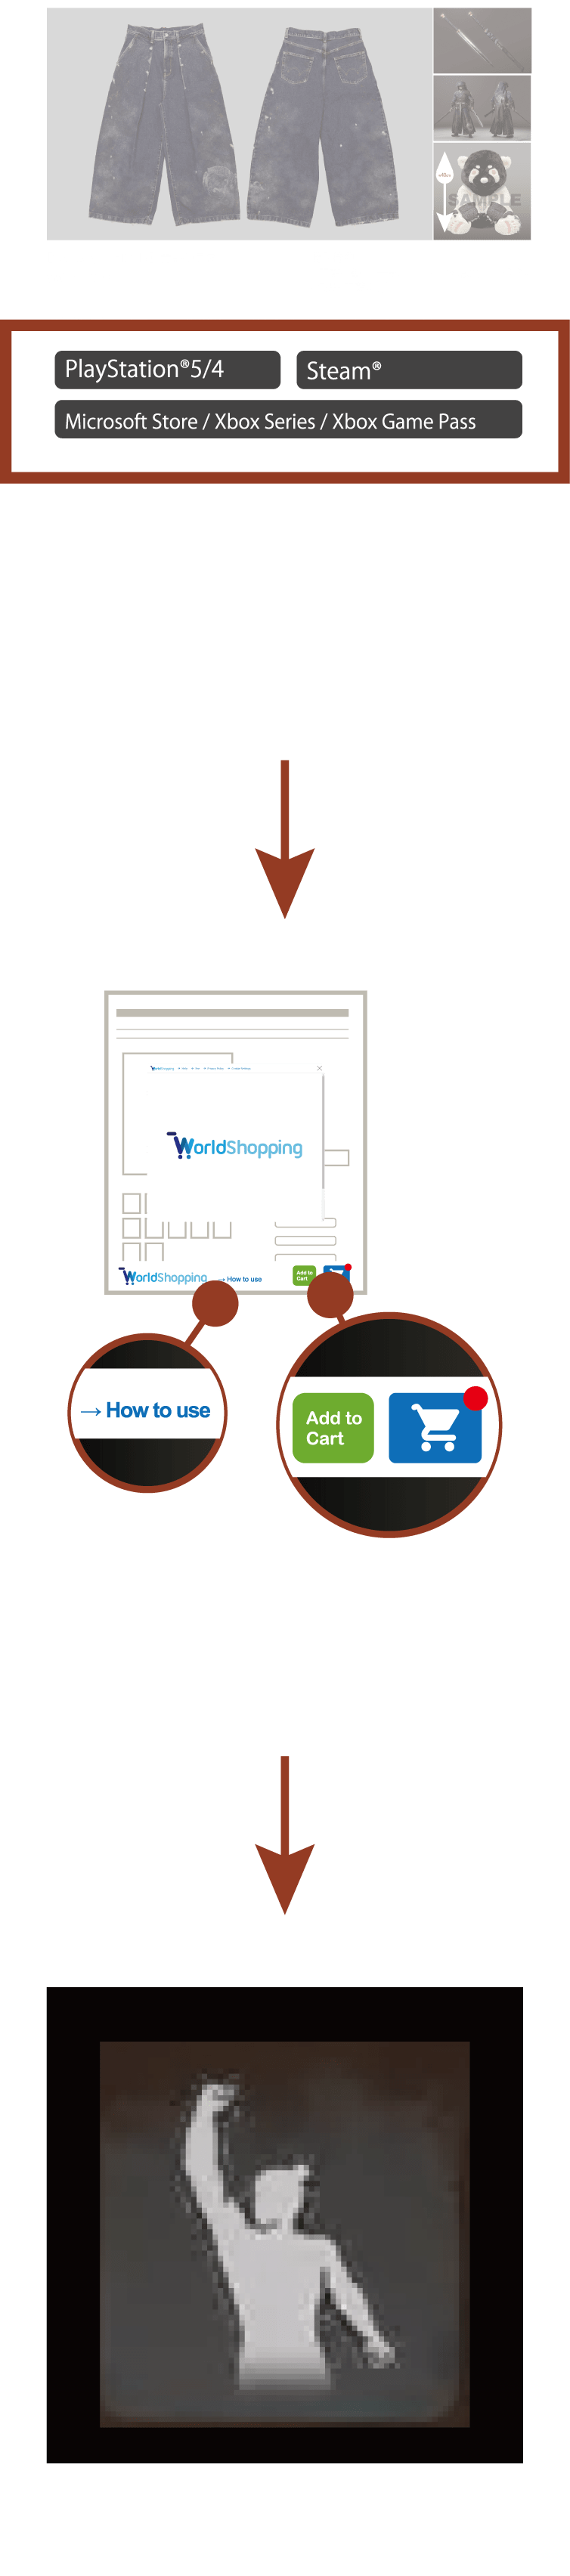 HOW TO PURCHASE FROM OUTSIDE JAPAN